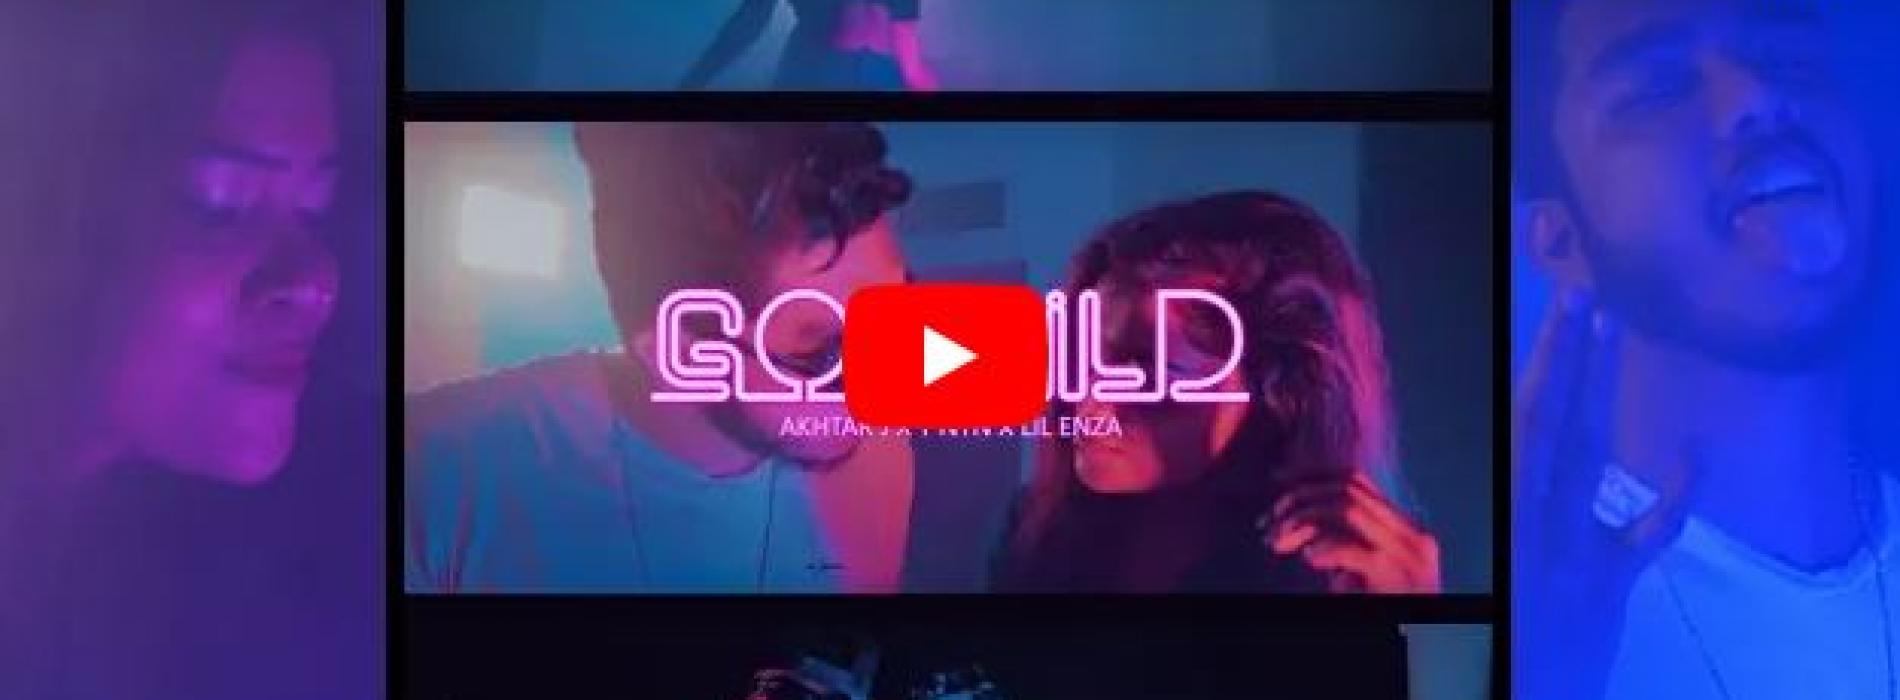 New Music : Akhtar J – GO WILD (feat T Nyn & Lil EnZa) [Official Music Video]